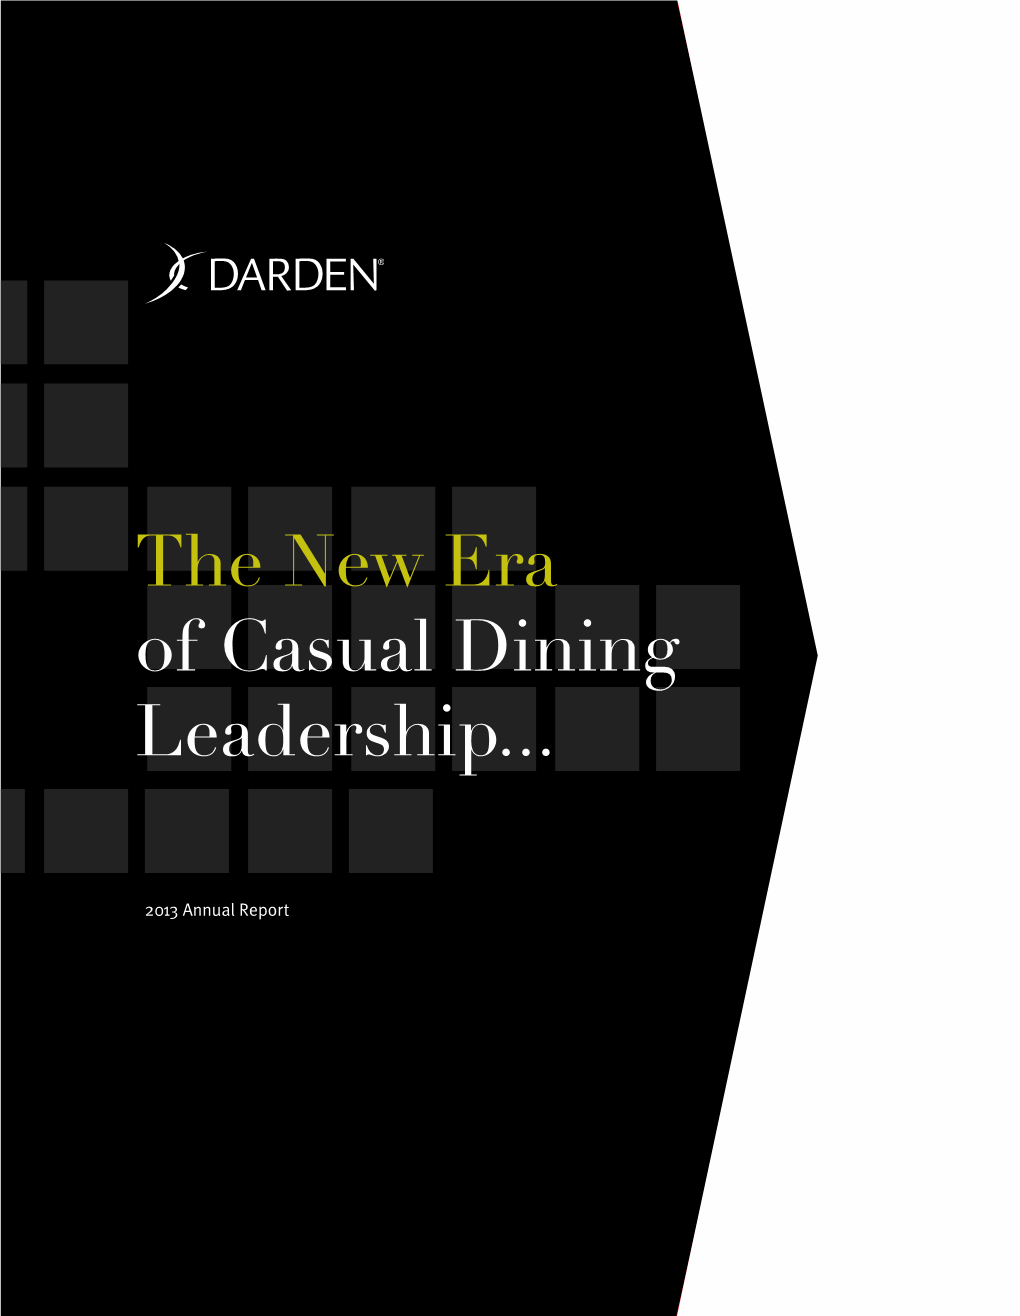 The New Era of Casual Dining Leadership